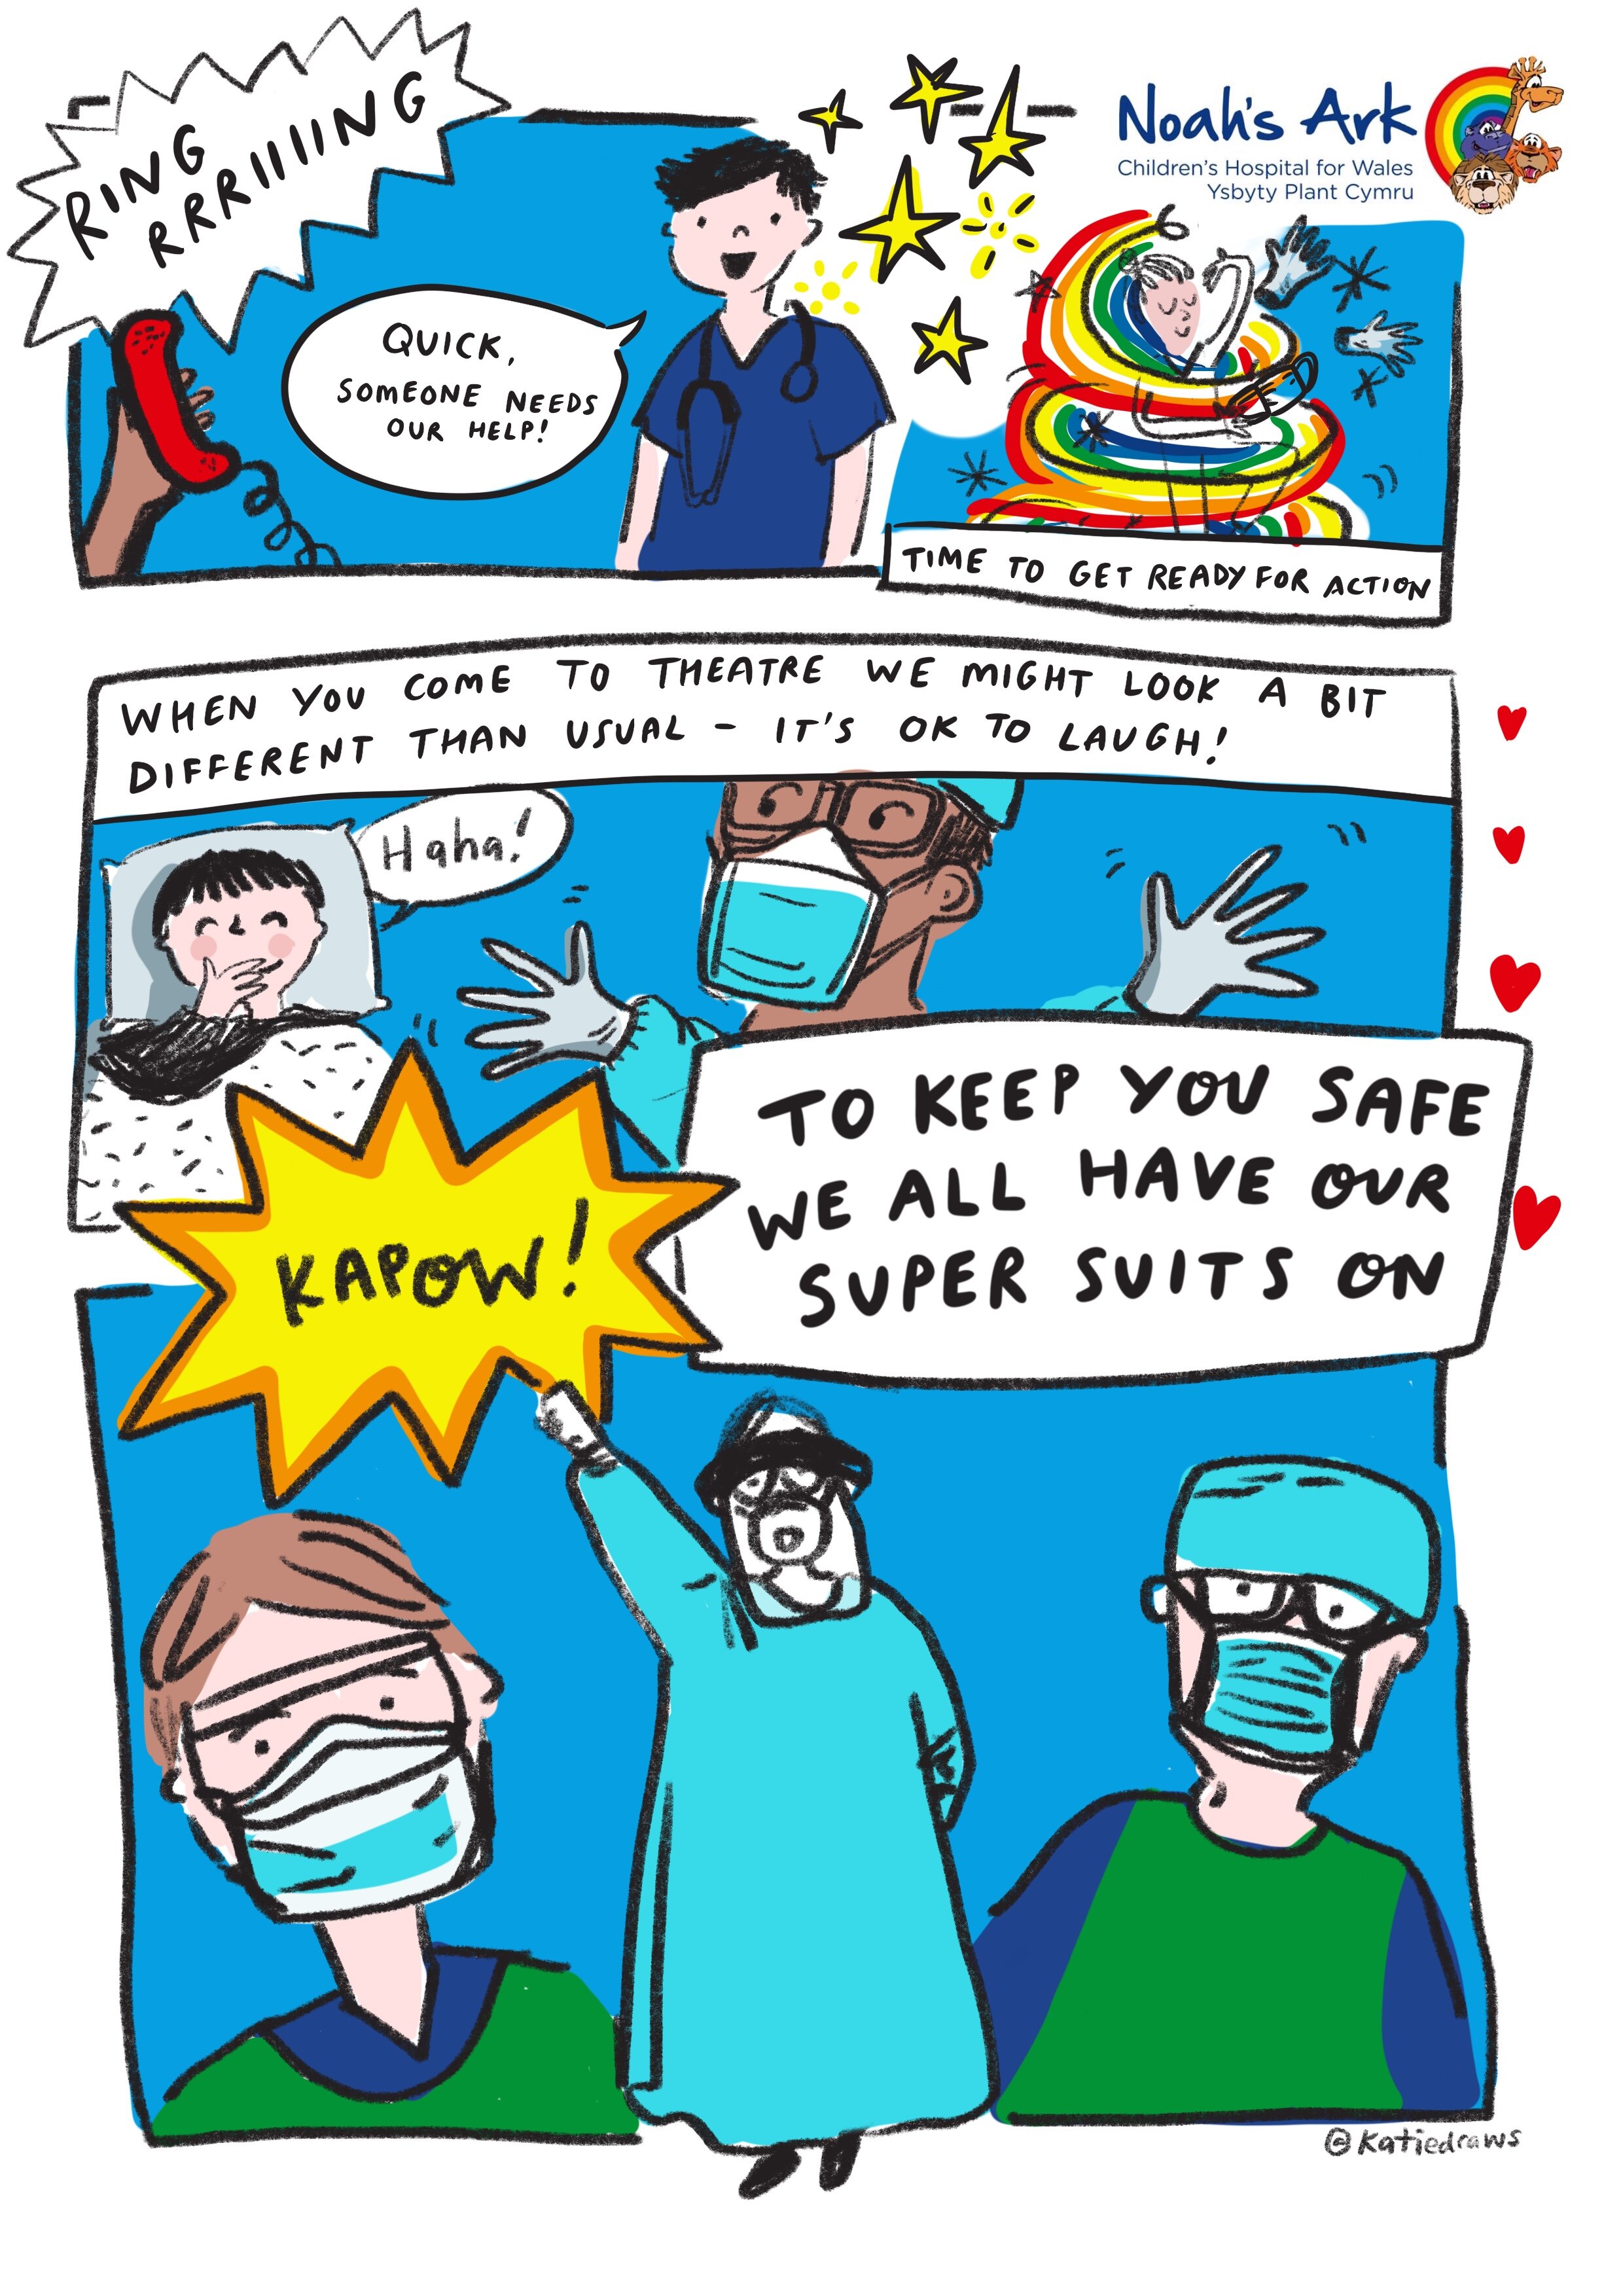 An NHS Comic Strip making PPE less scary for children — Katie Chappell  Illustrator